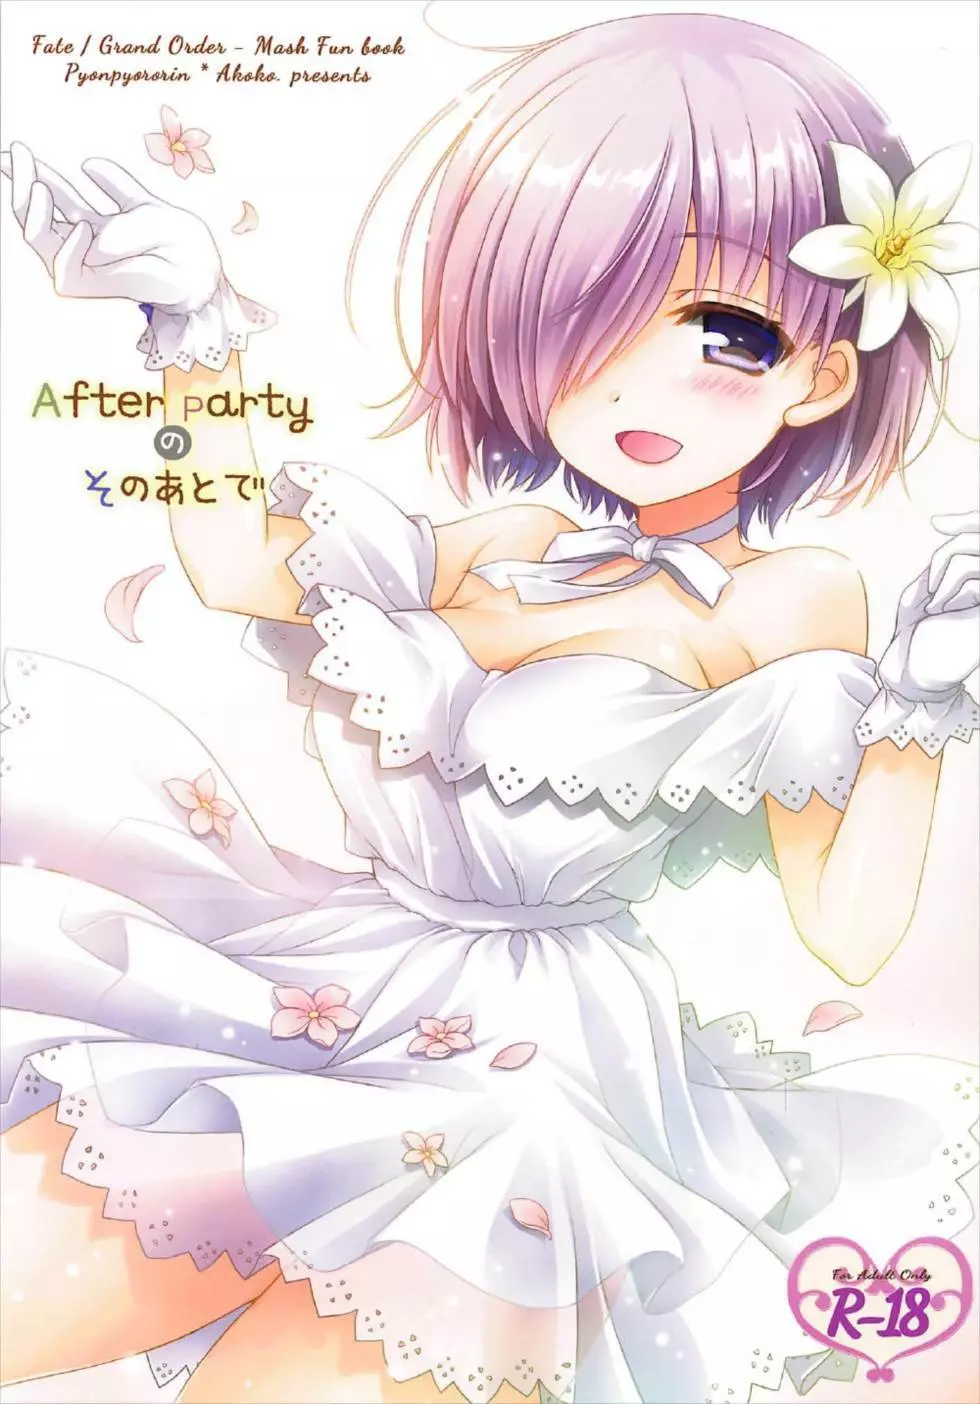 After Partyのそのあとで